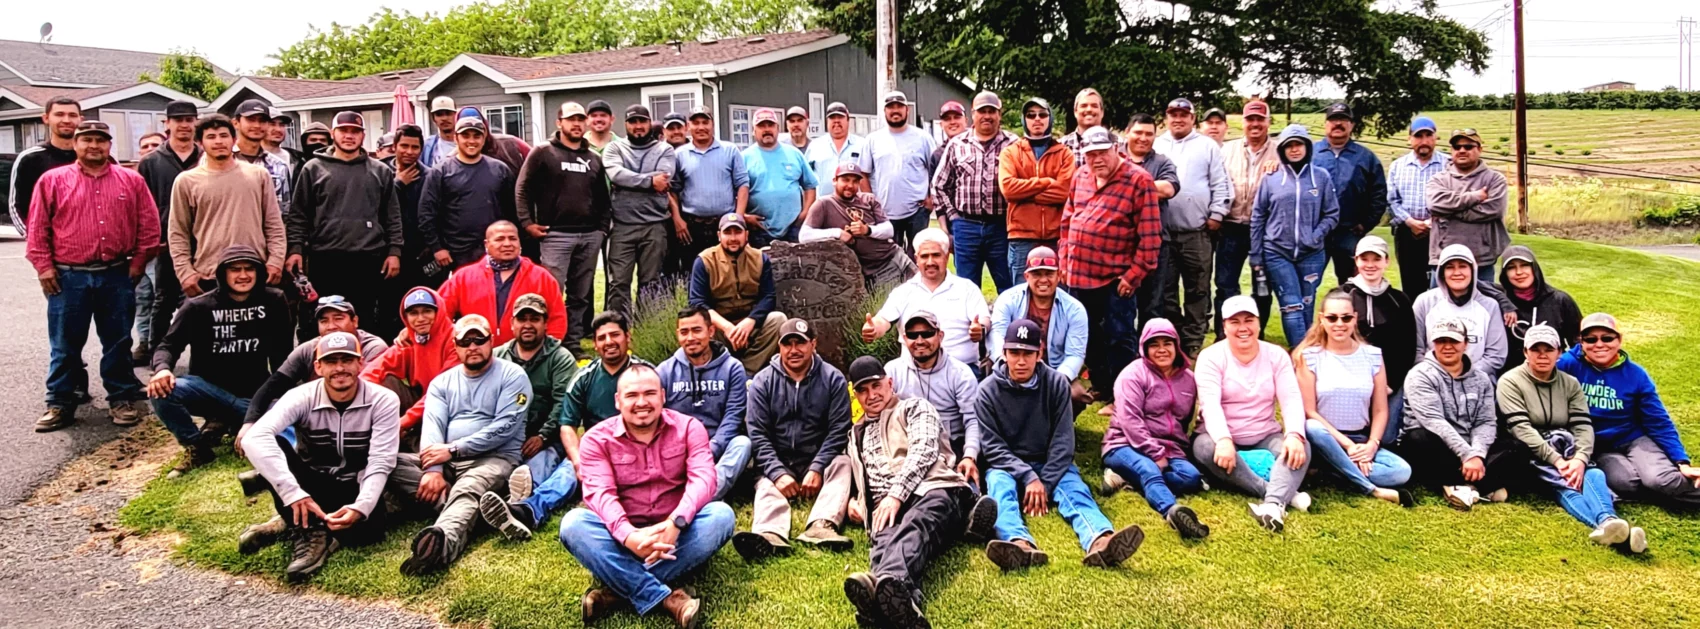 Group photo of staff or workers at McClaskey Orchards from 2022 sitting and standing on grass with an office or house behind them.